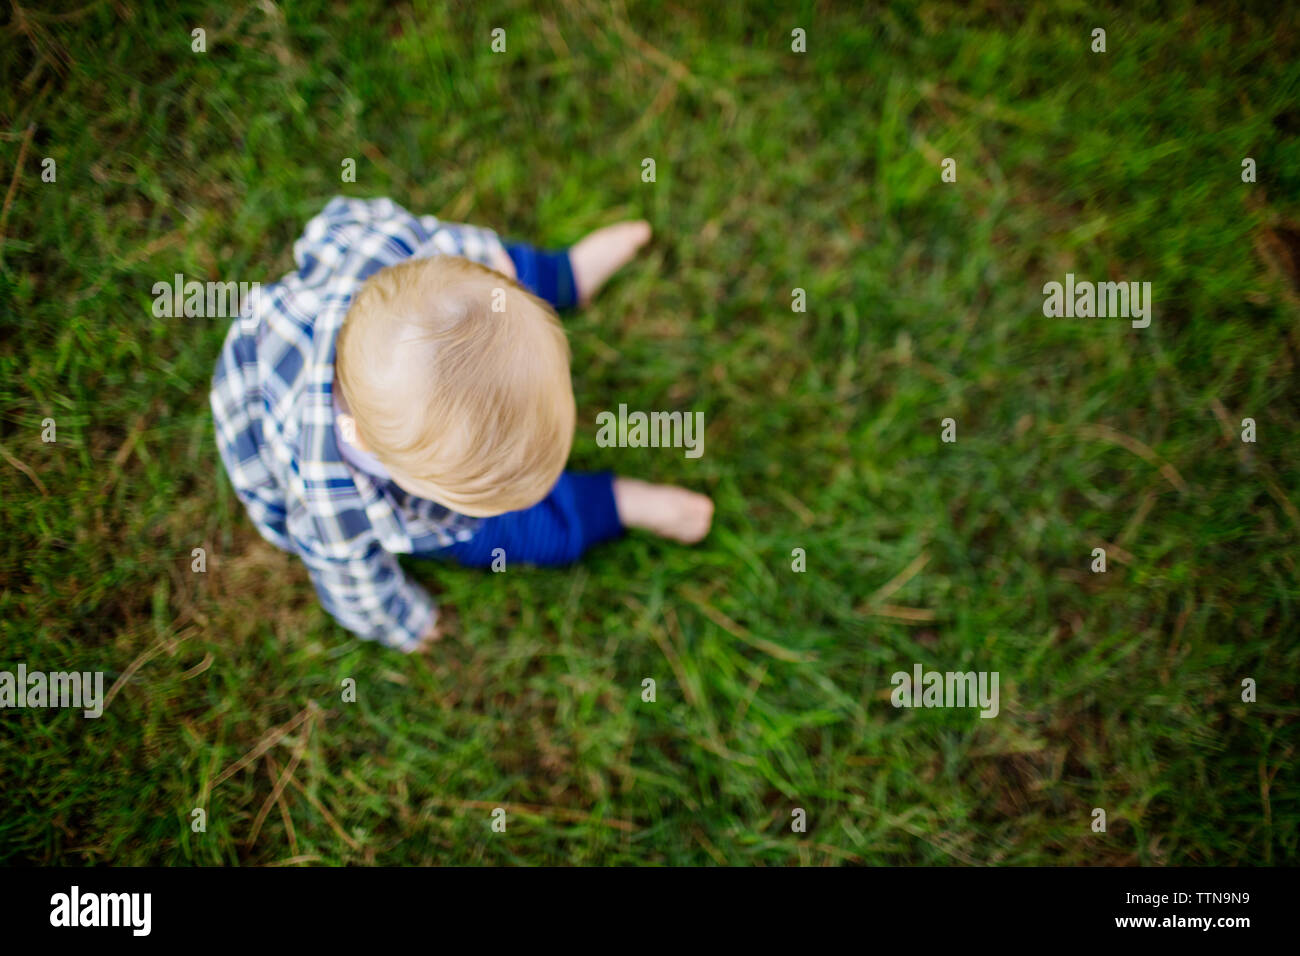 Overhead view of baby sitting on grass field at park Stock Photo